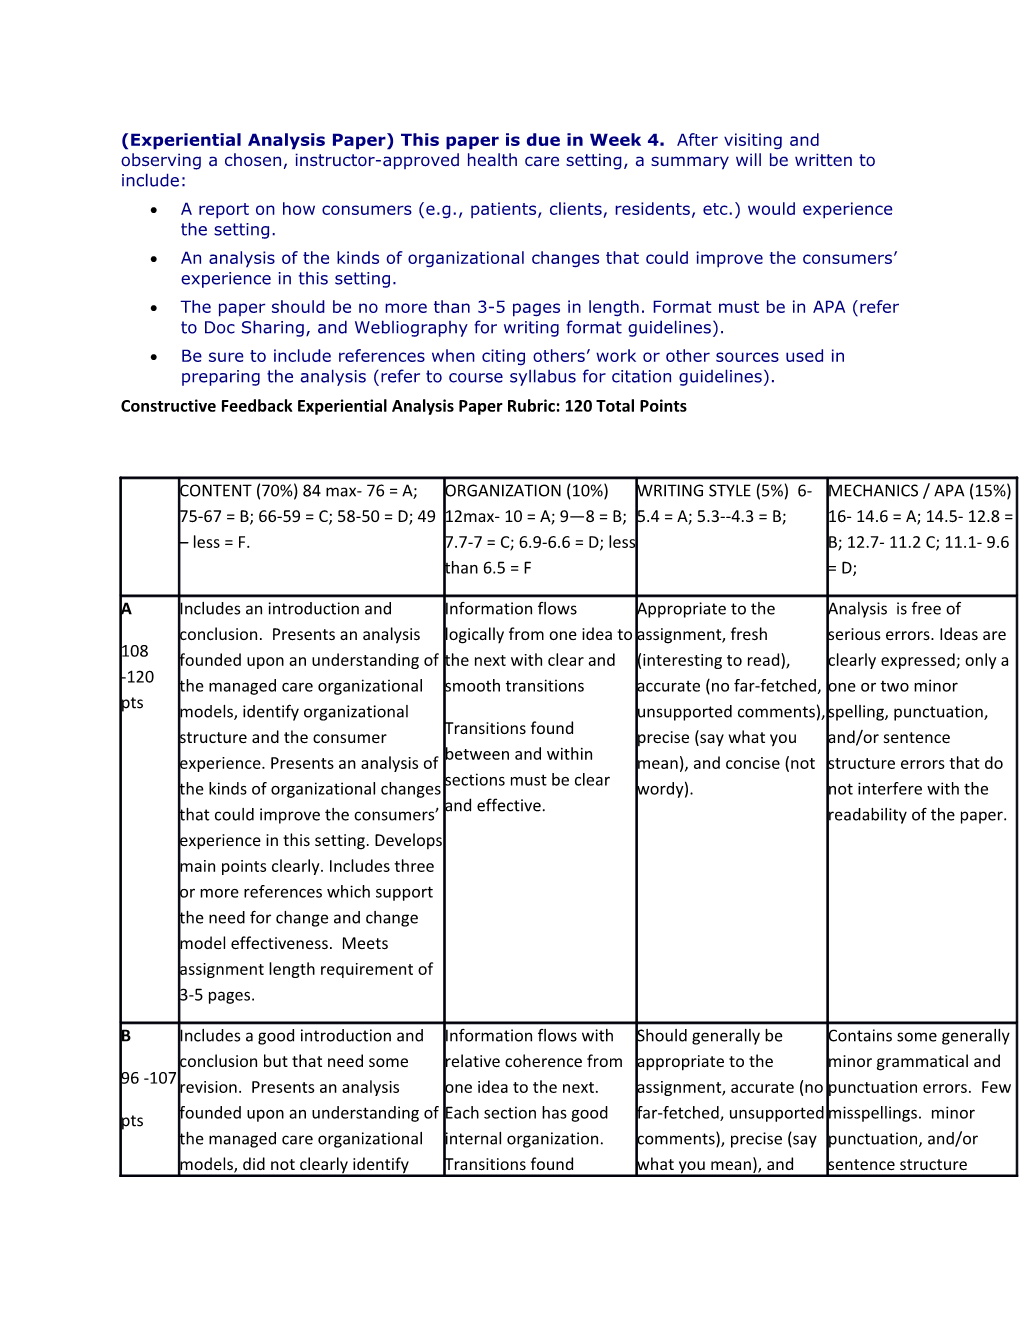 Constructive Feedback Experiential Analysis Paper Rubric: 120 Total Points